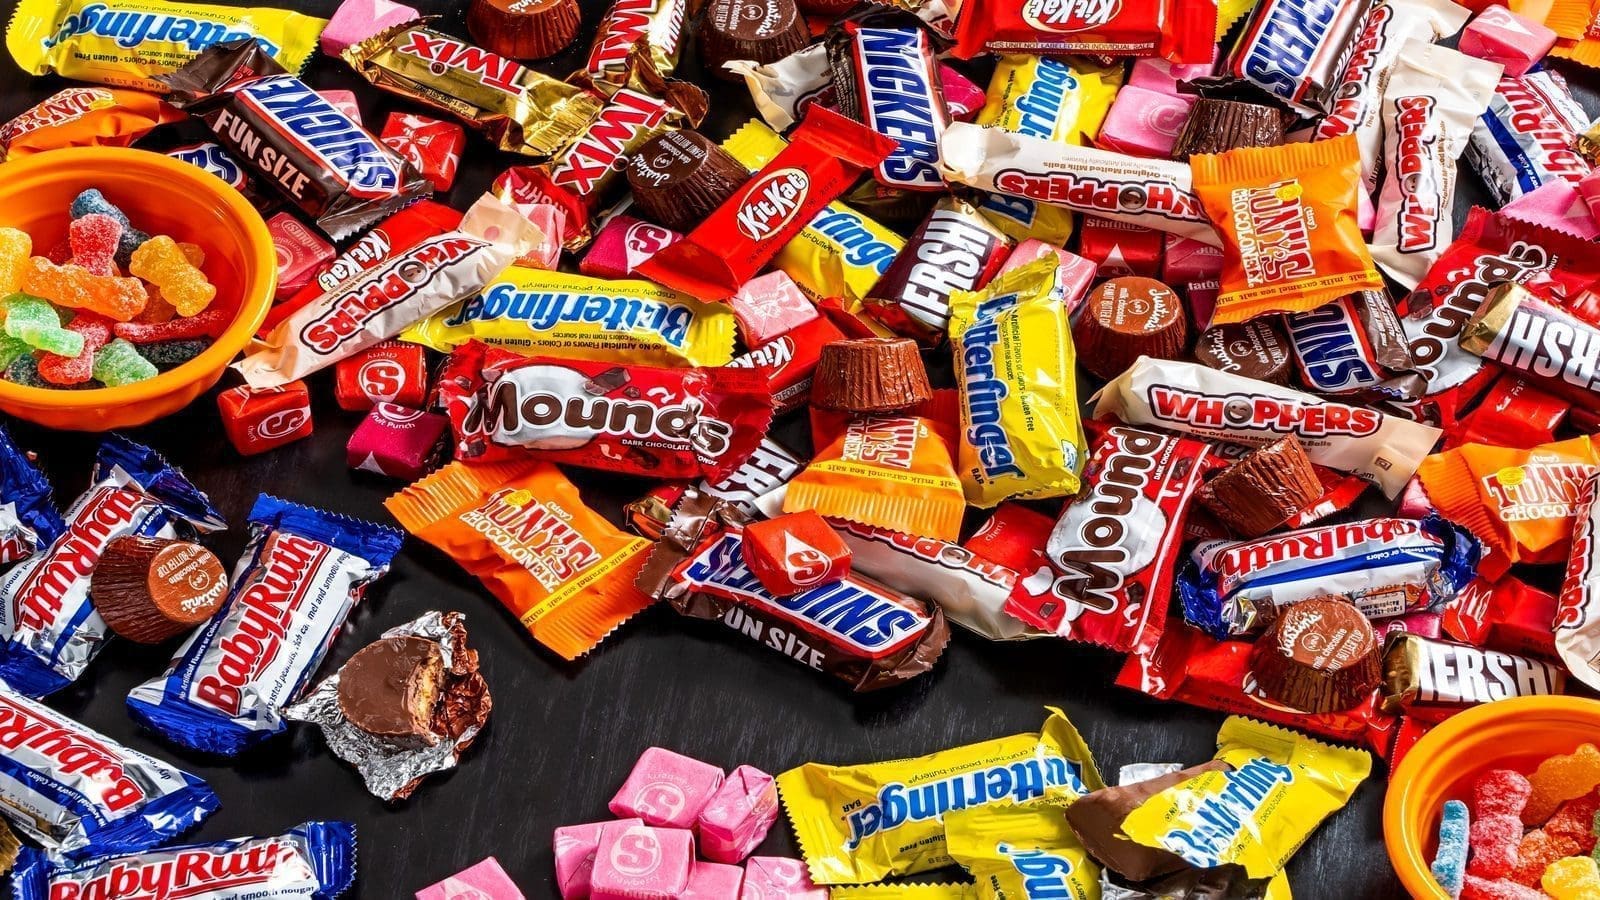 US Candy industry achieves 5-year calorie reduction and labeling goals